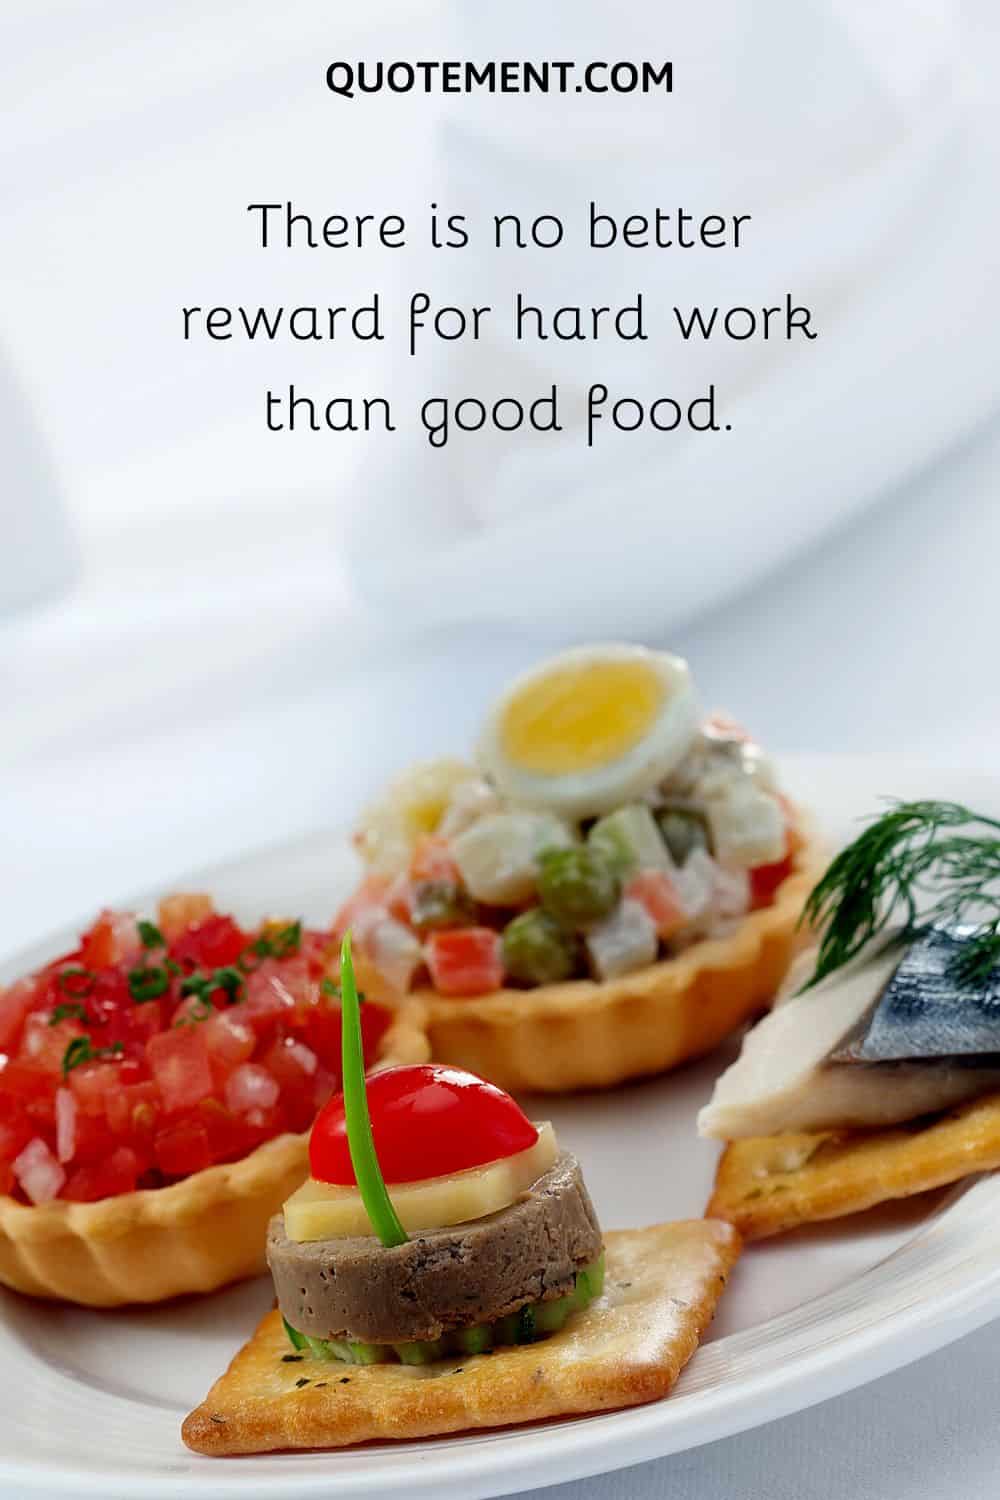 There is no better reward for hard work than good food.